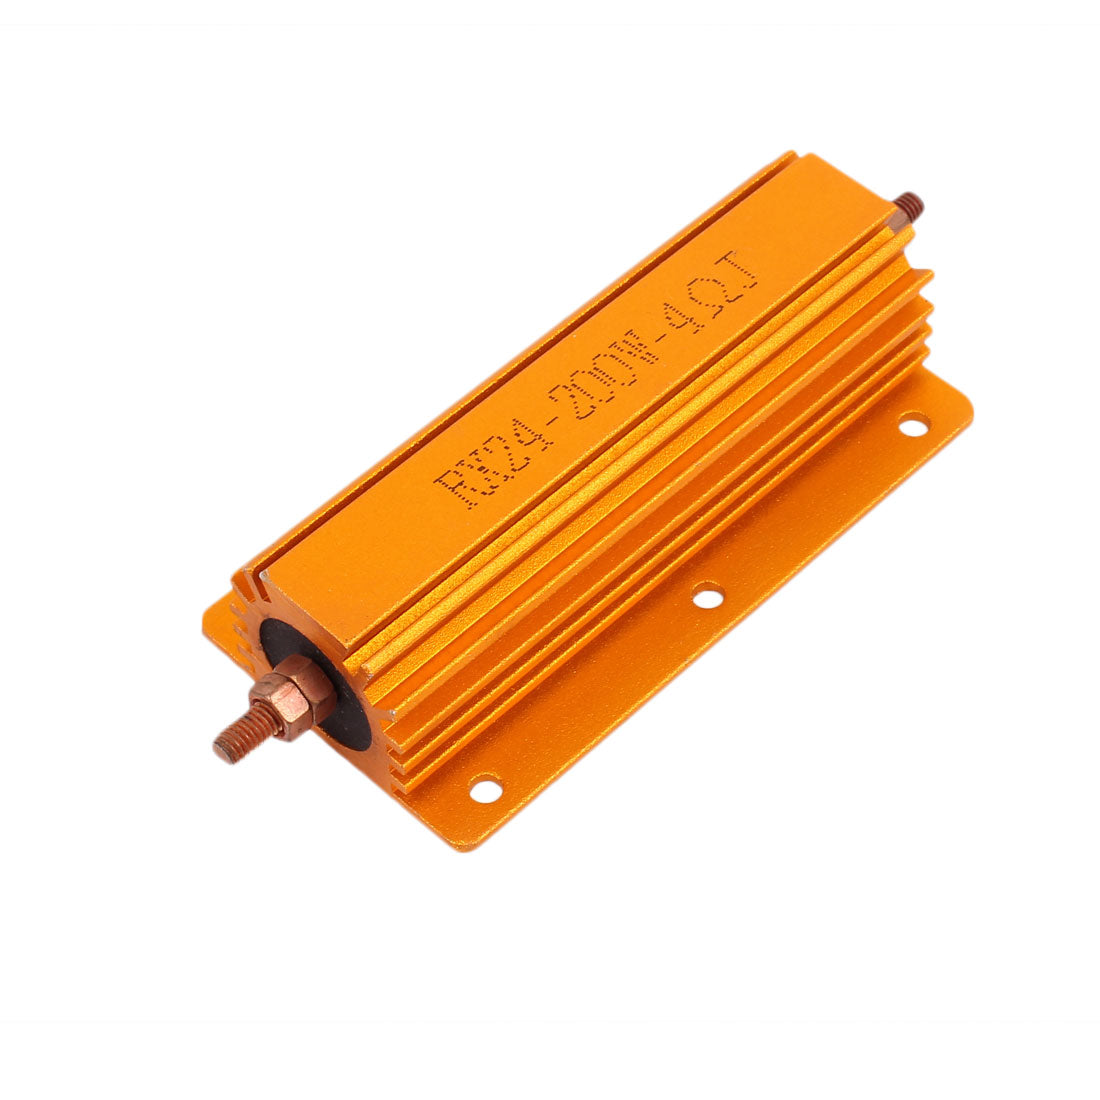 uxcell Uxcell 5% 200W 4 Ohm Wirewound Aluminum Housed Clad Resistor Gold Tone